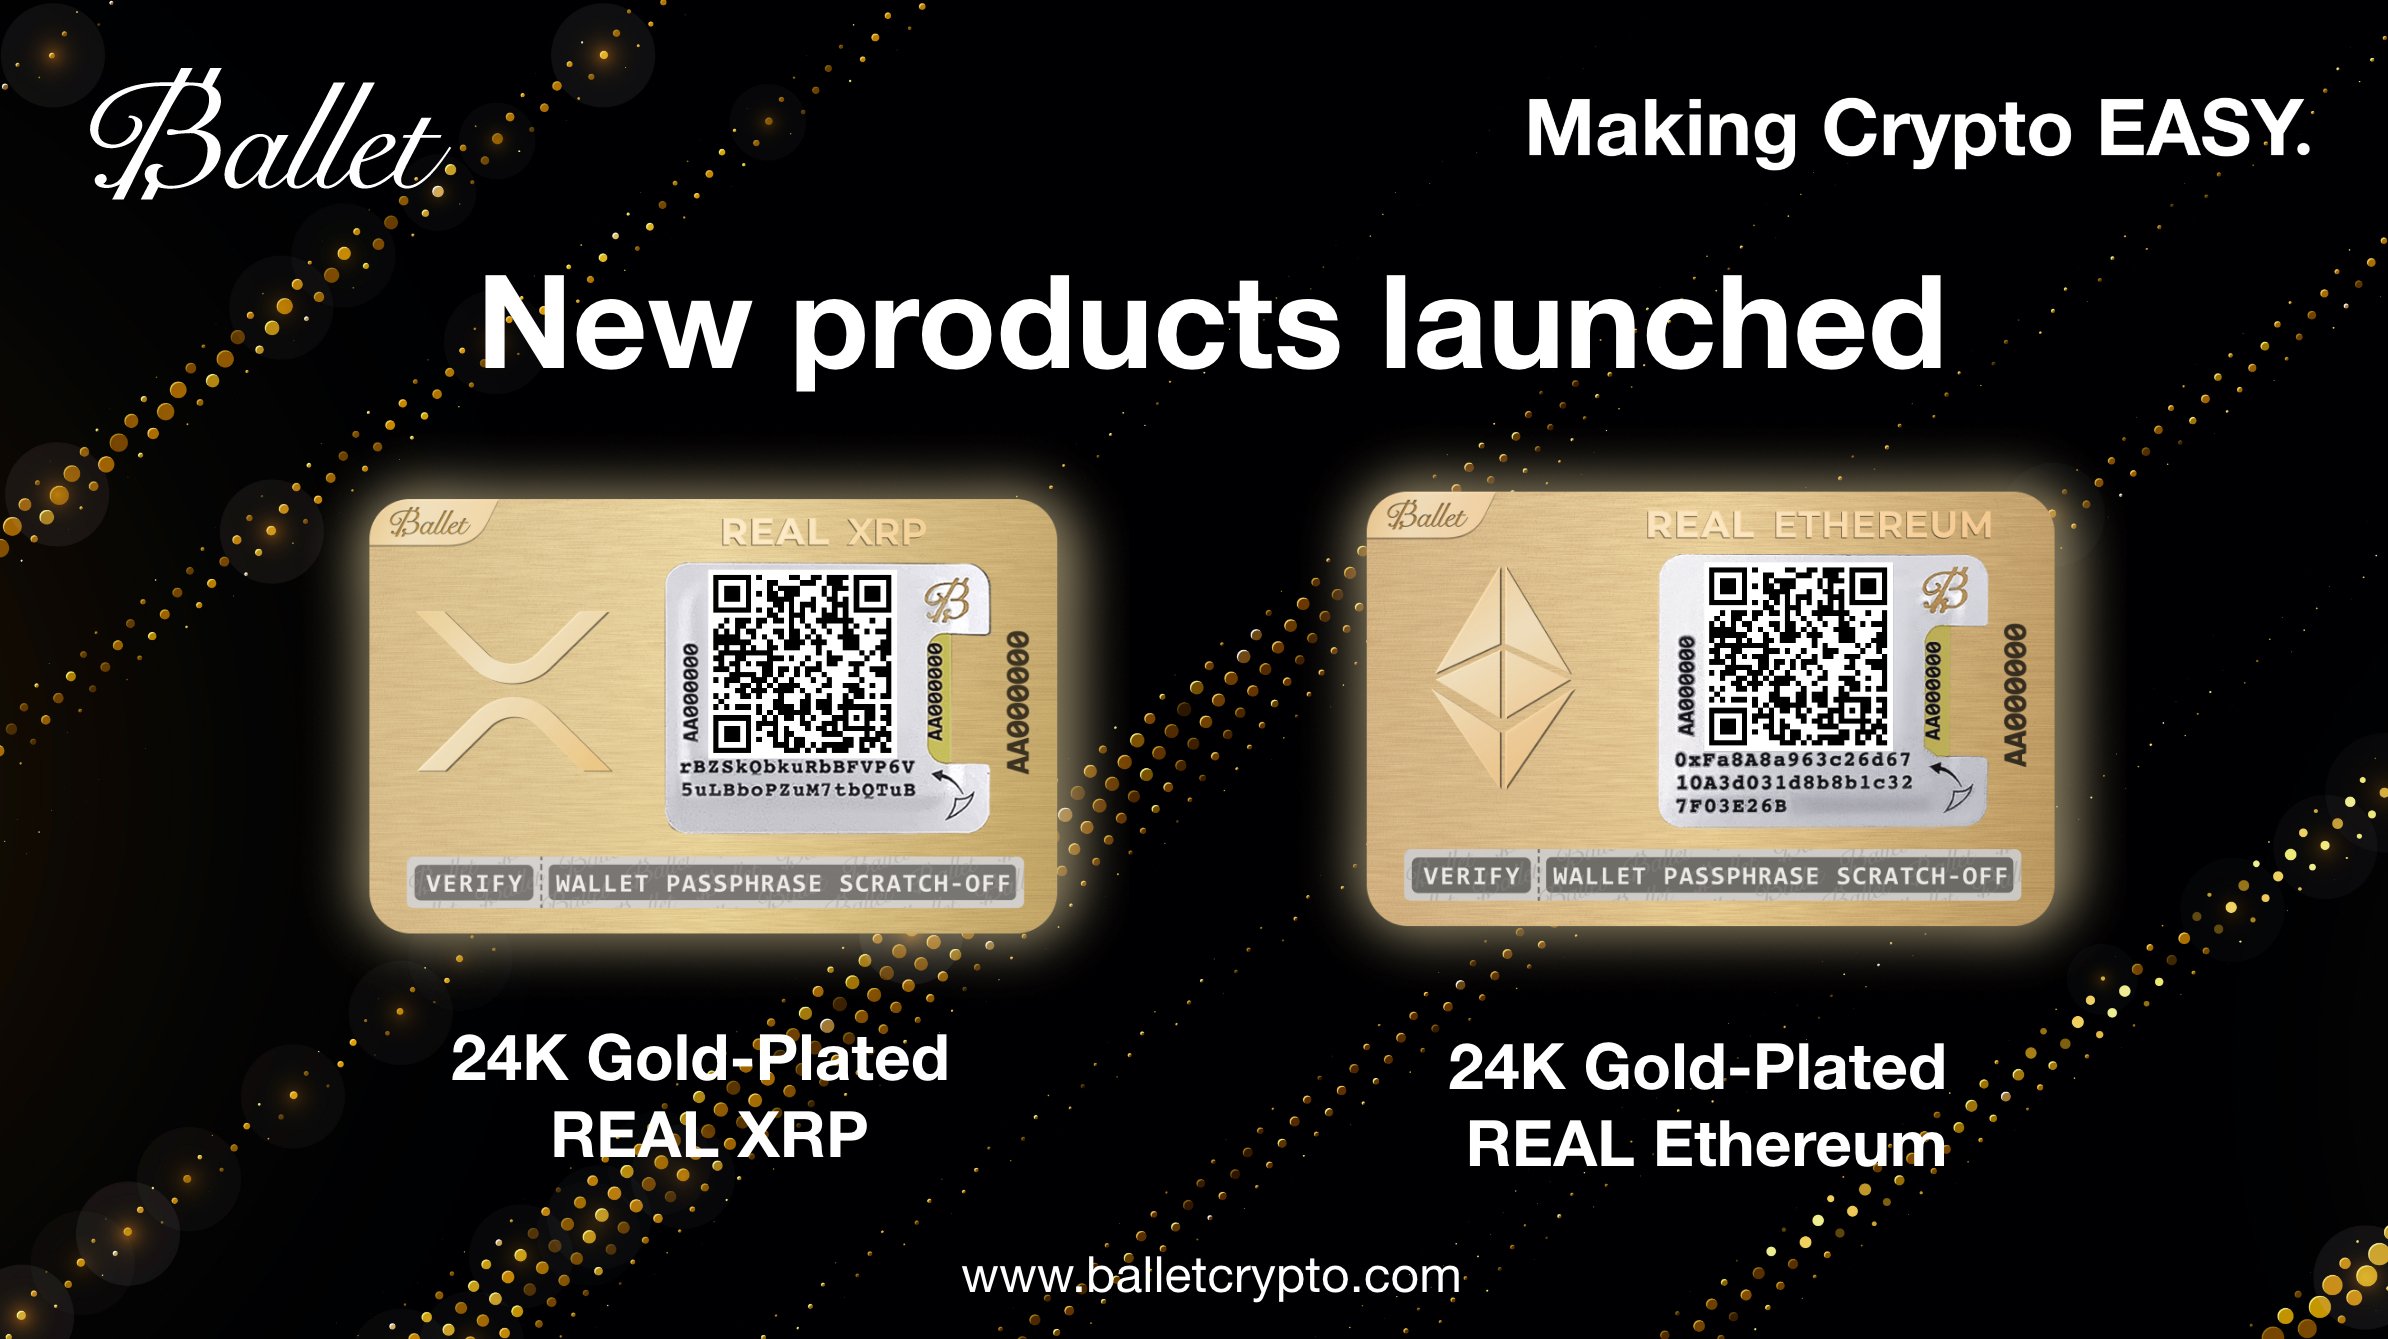 Ballet Cryptocurrency Wallet - Making Crypto EASY. The world’s first multi-currency non-electronic physical cryptocurrency wallet, designed for everyday people. Use Ballet Wallet to easily store Bitcoin and other 50+ cryptocurrencies. Official Store for Ballet non-electronic physical multicurrency wallet